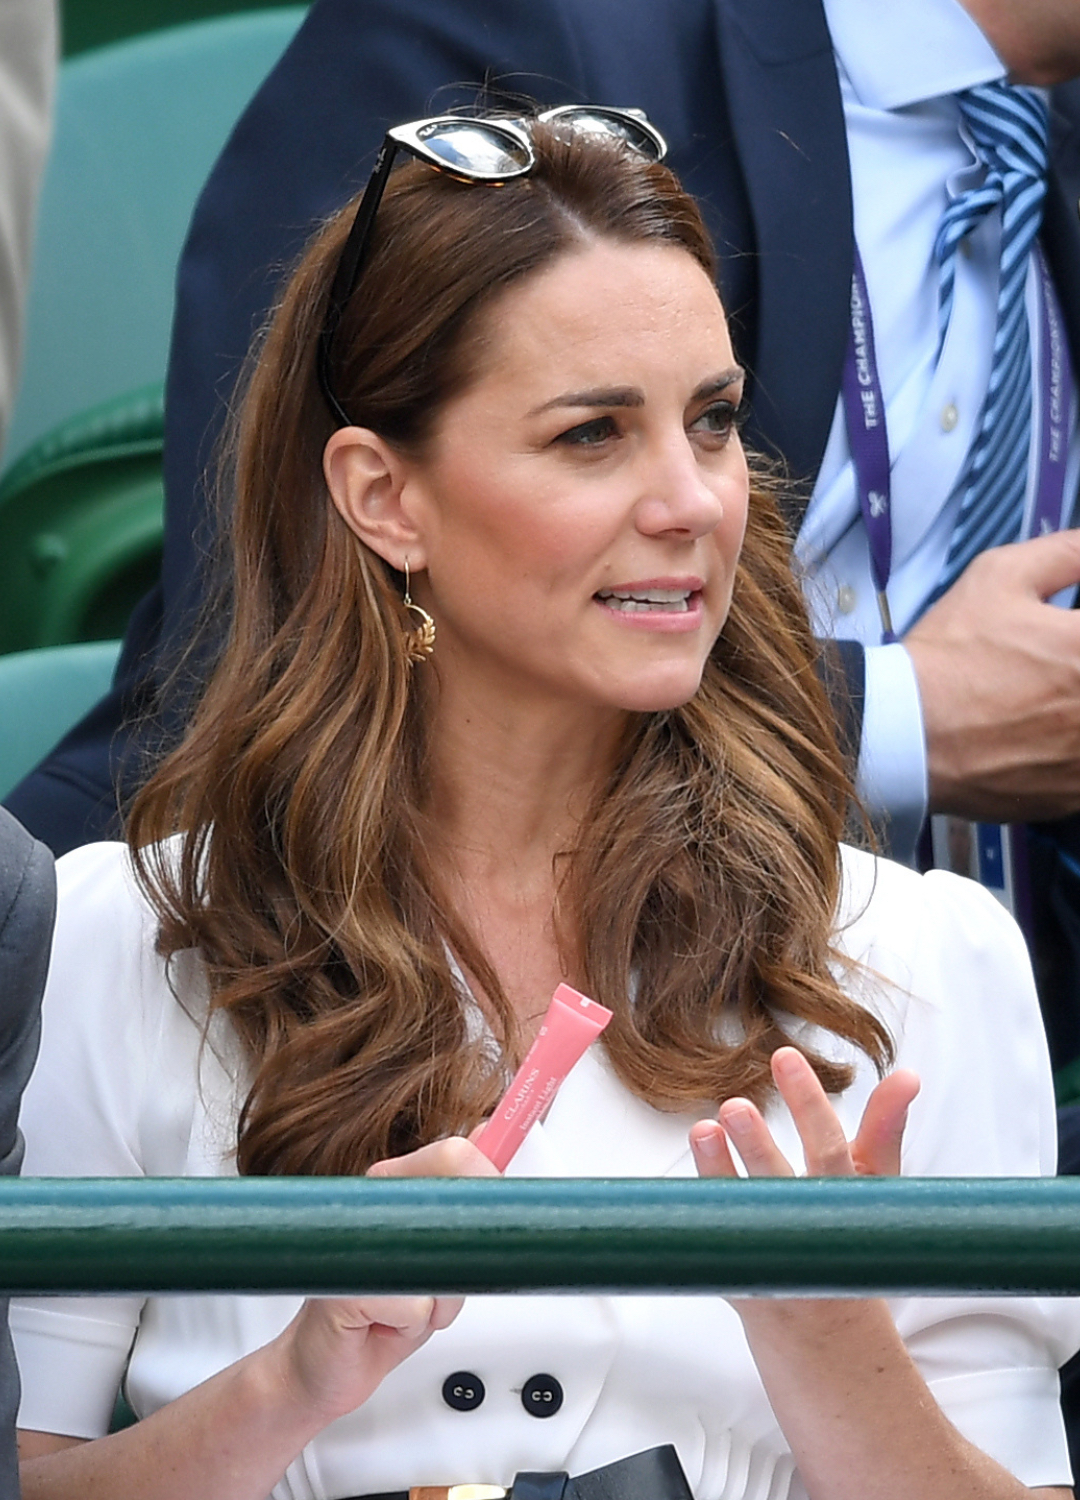 Catherine, Duchess of Cambridge attends day two of the Wimbledon Tennis Championships at All England Lawn Tennis and Croquet Club on July 02, 2019 in London, England